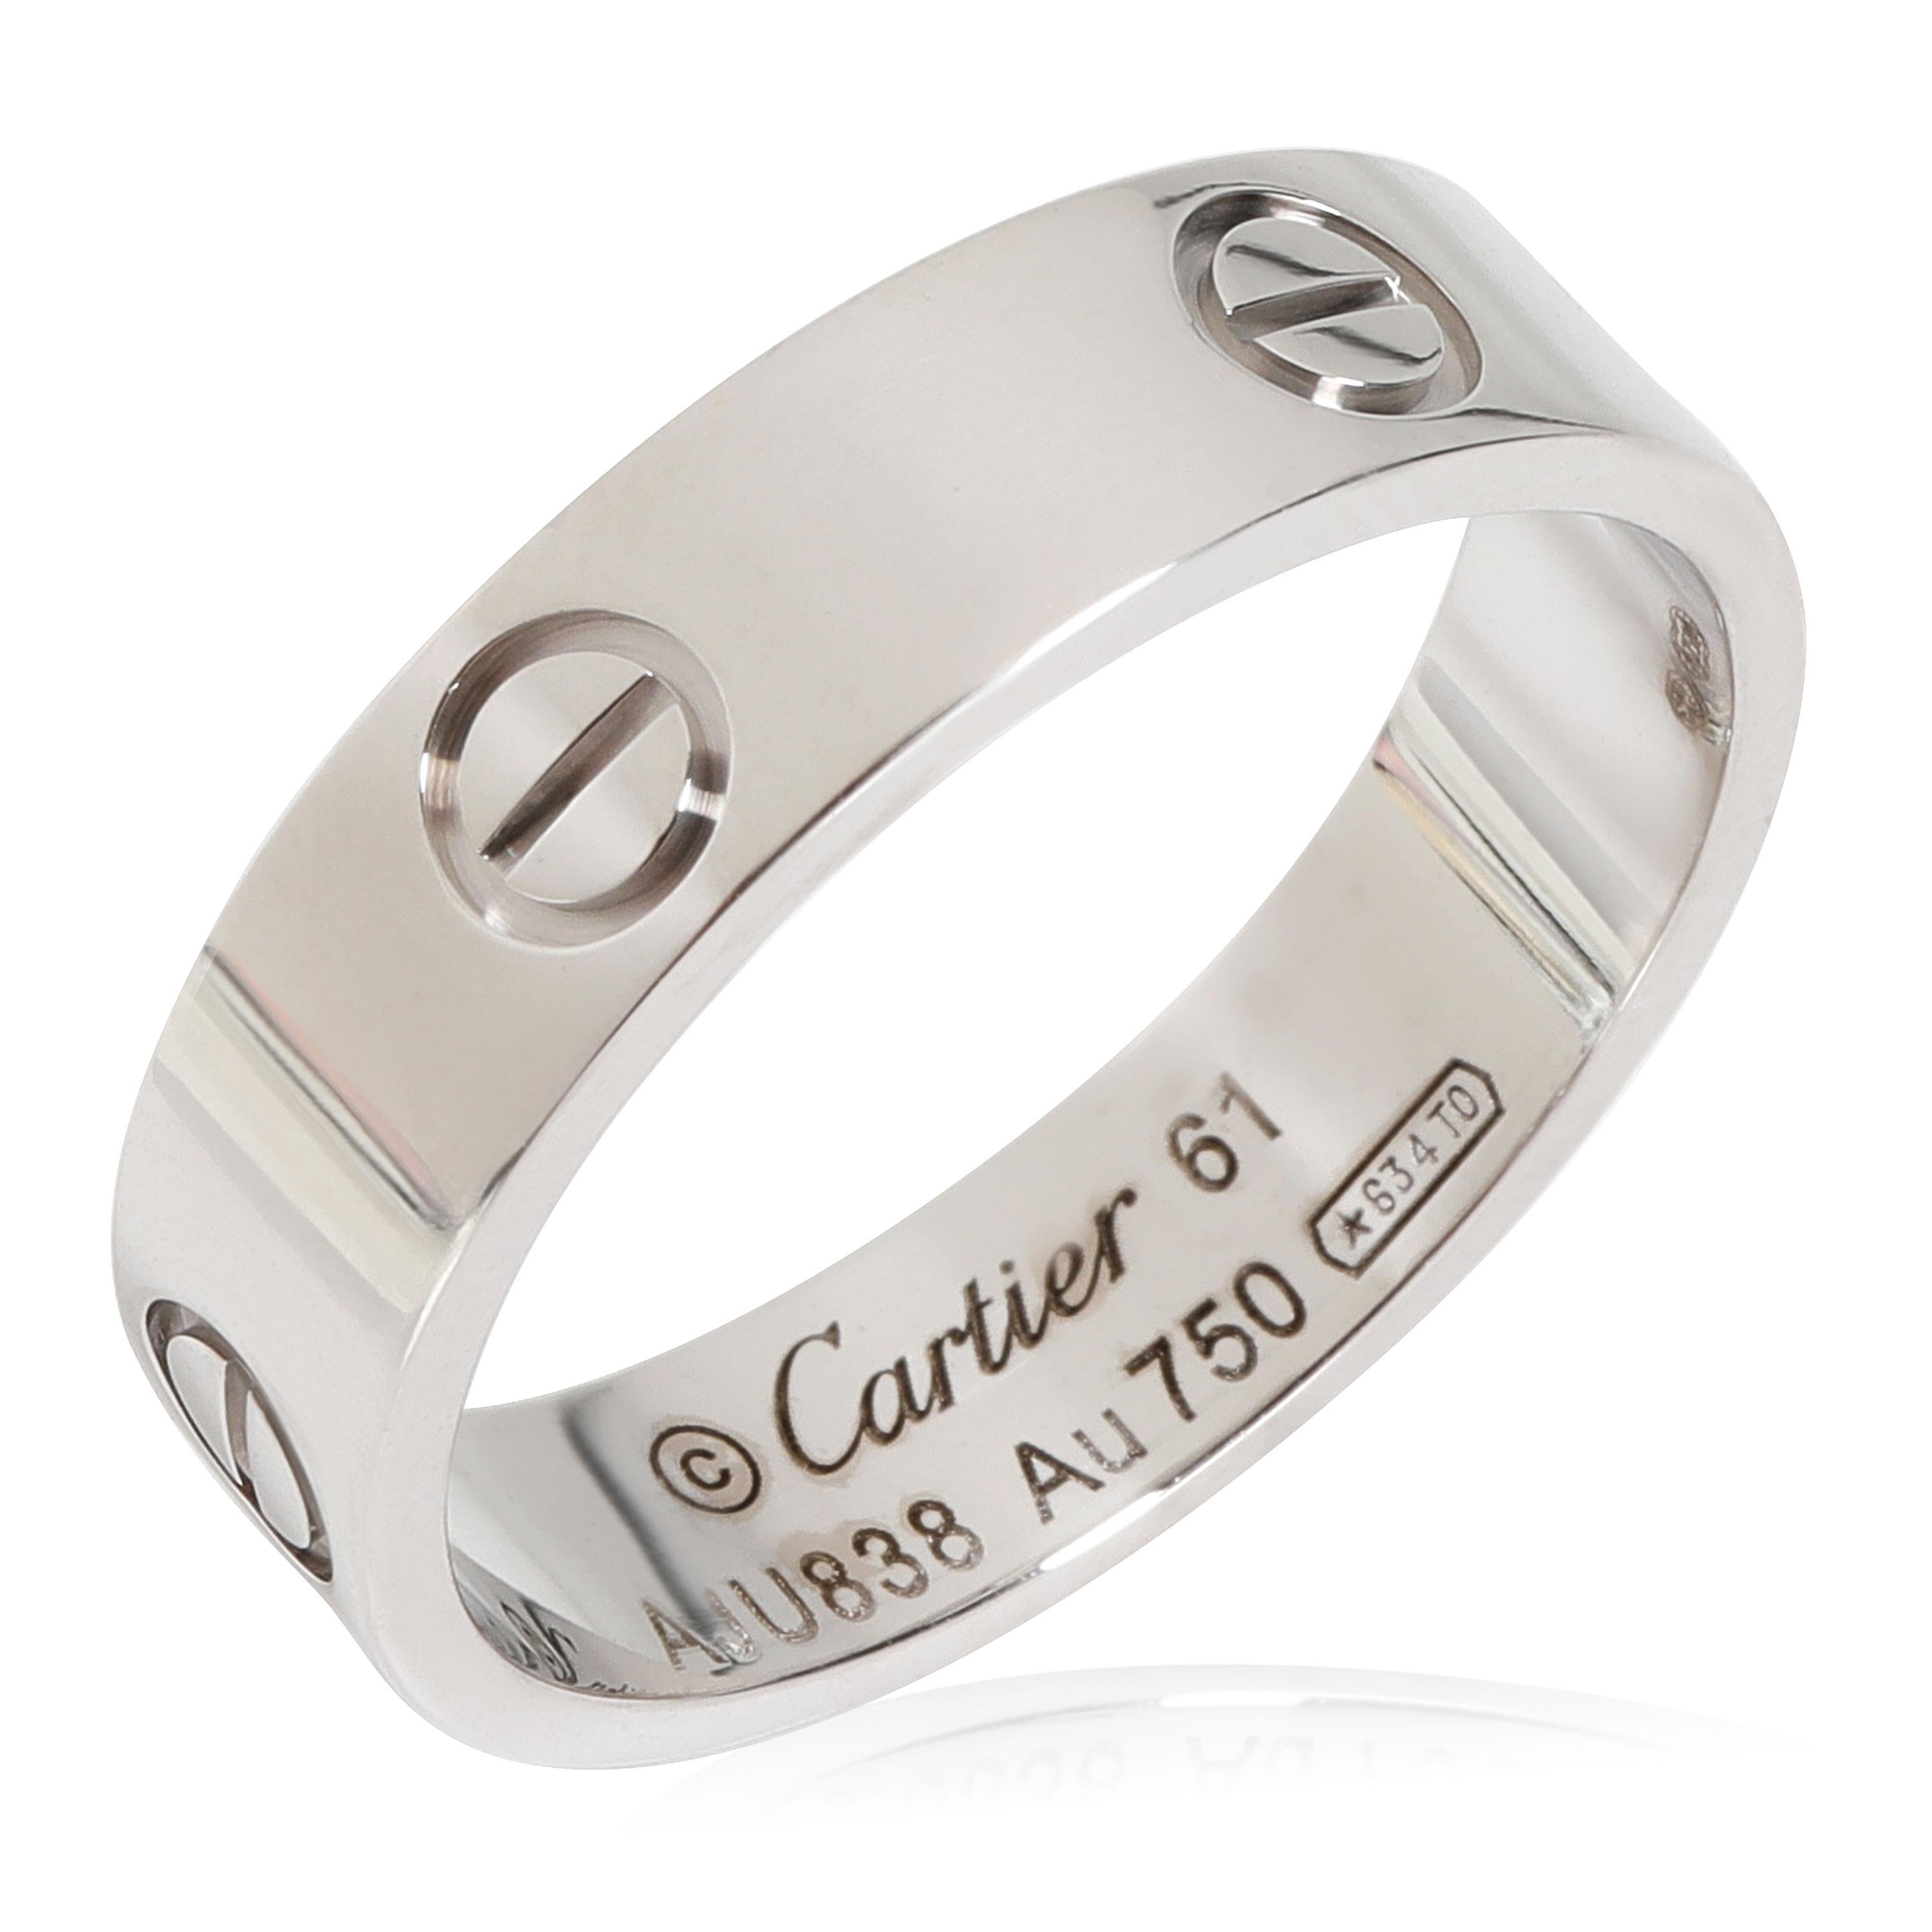 Cartier Love Ring in 18k White Gold

PRIMARY DETAILS
SKU: 115827
Listing Title: Cartier Love Ring in 18k White Gold
Condition Description: Retails for 1950 USD. In excellent condition and recently polished. Ring size is 9.5.
Brand: